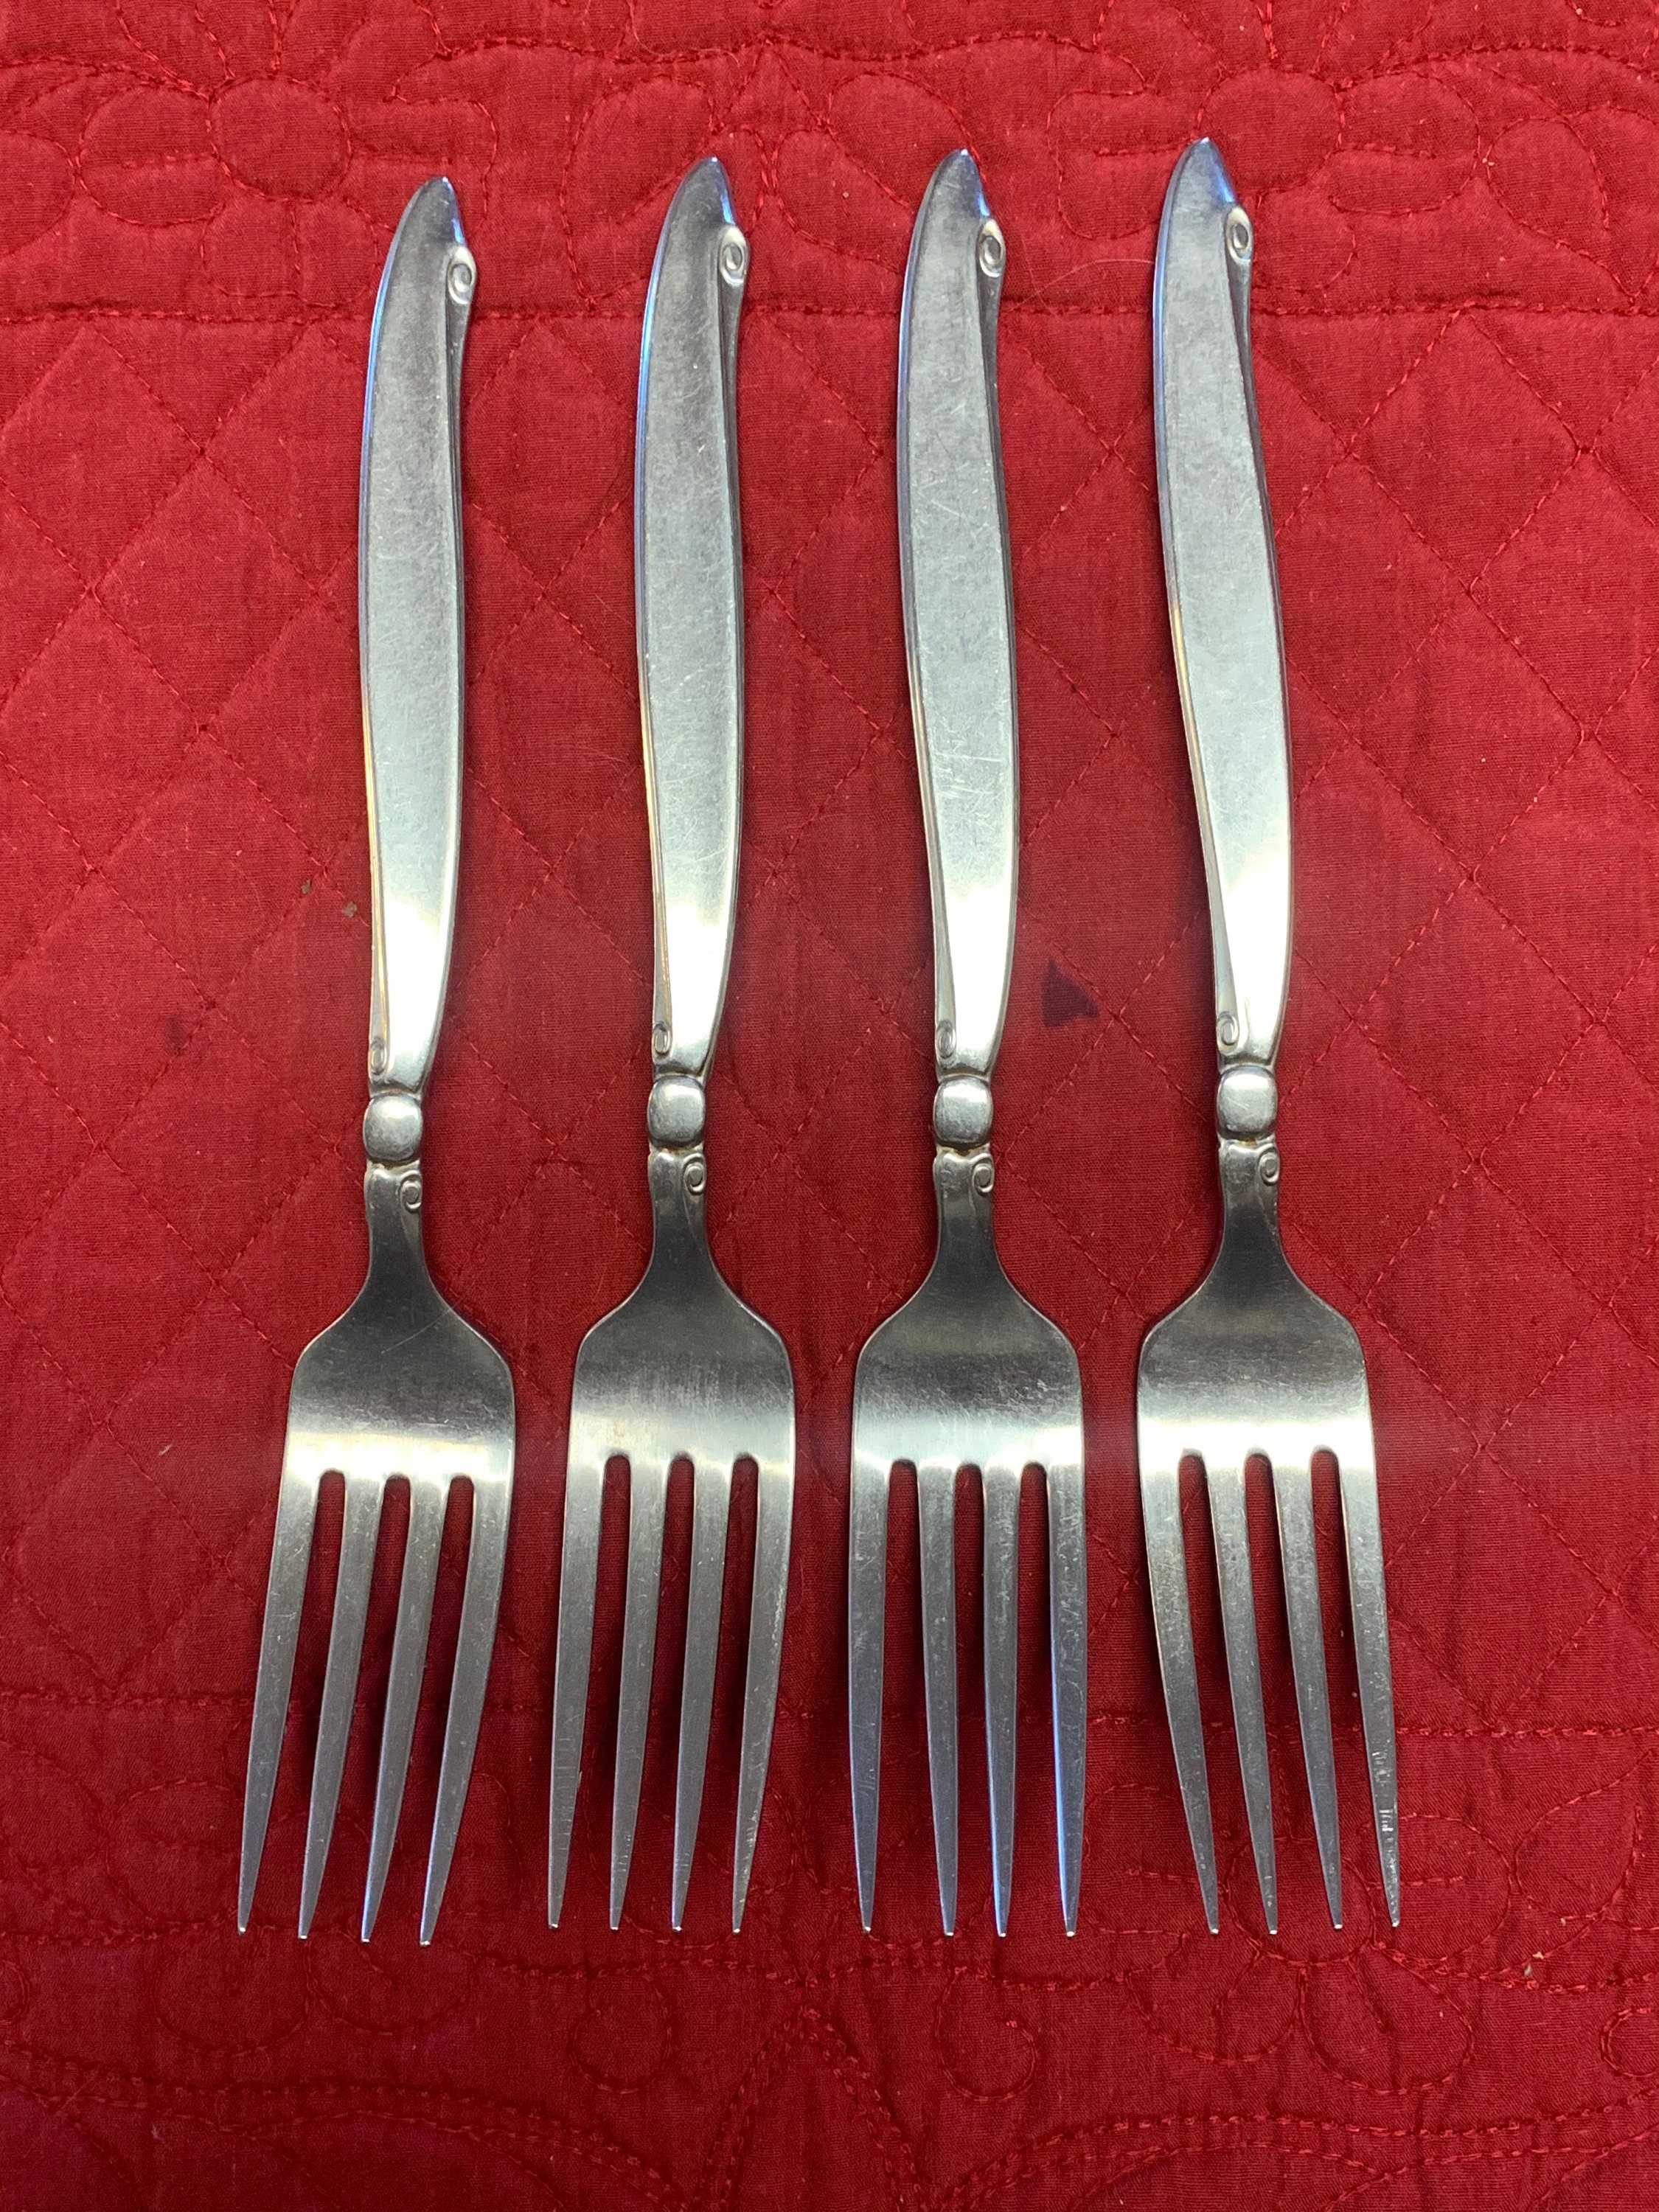 of 4 Oneida Deluxe stainless Chateau dinner forks 7 1/4" Set s 